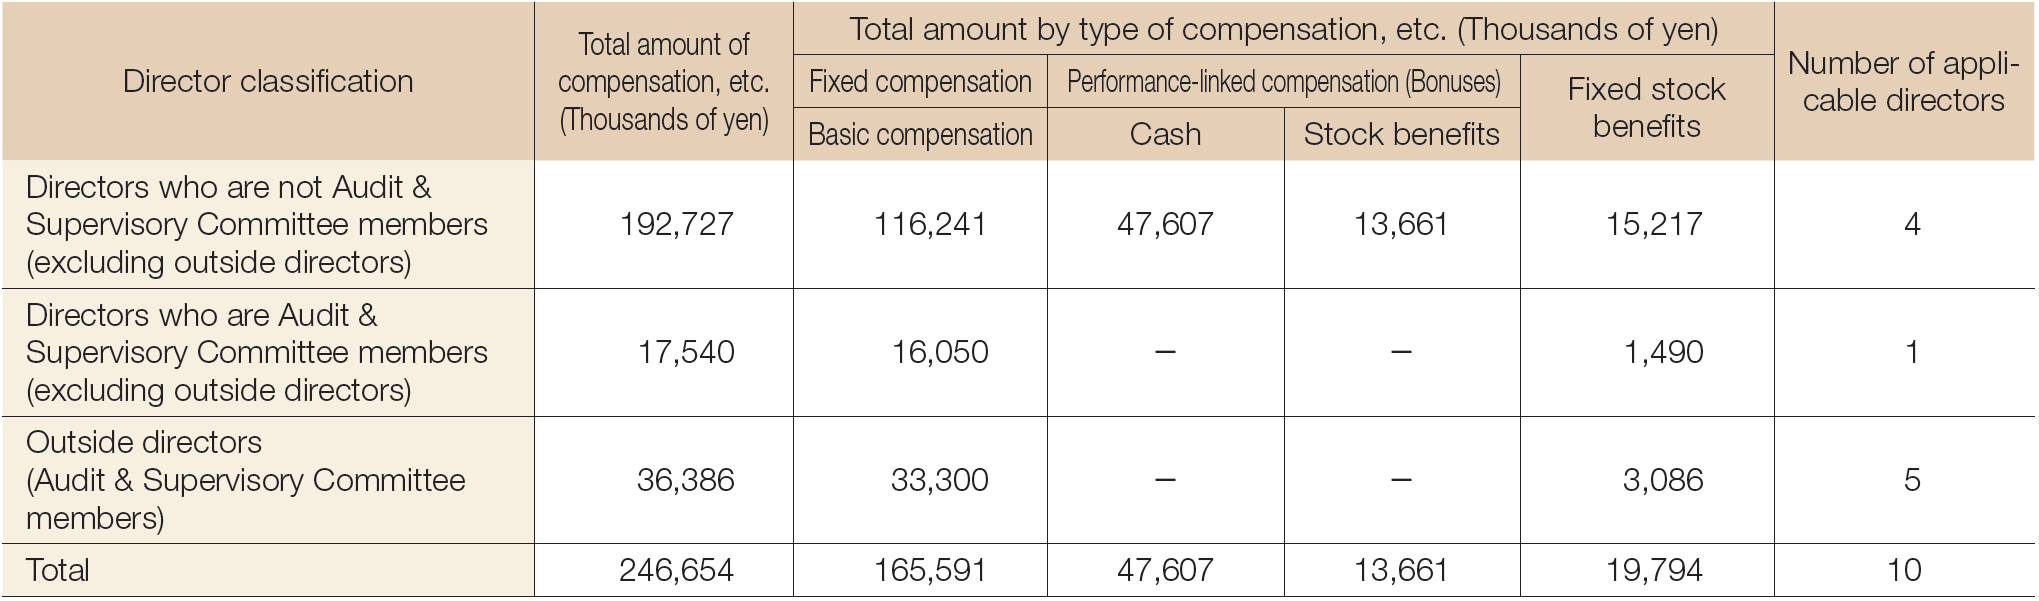 Total Amount of Compensation, etc. for FY2022